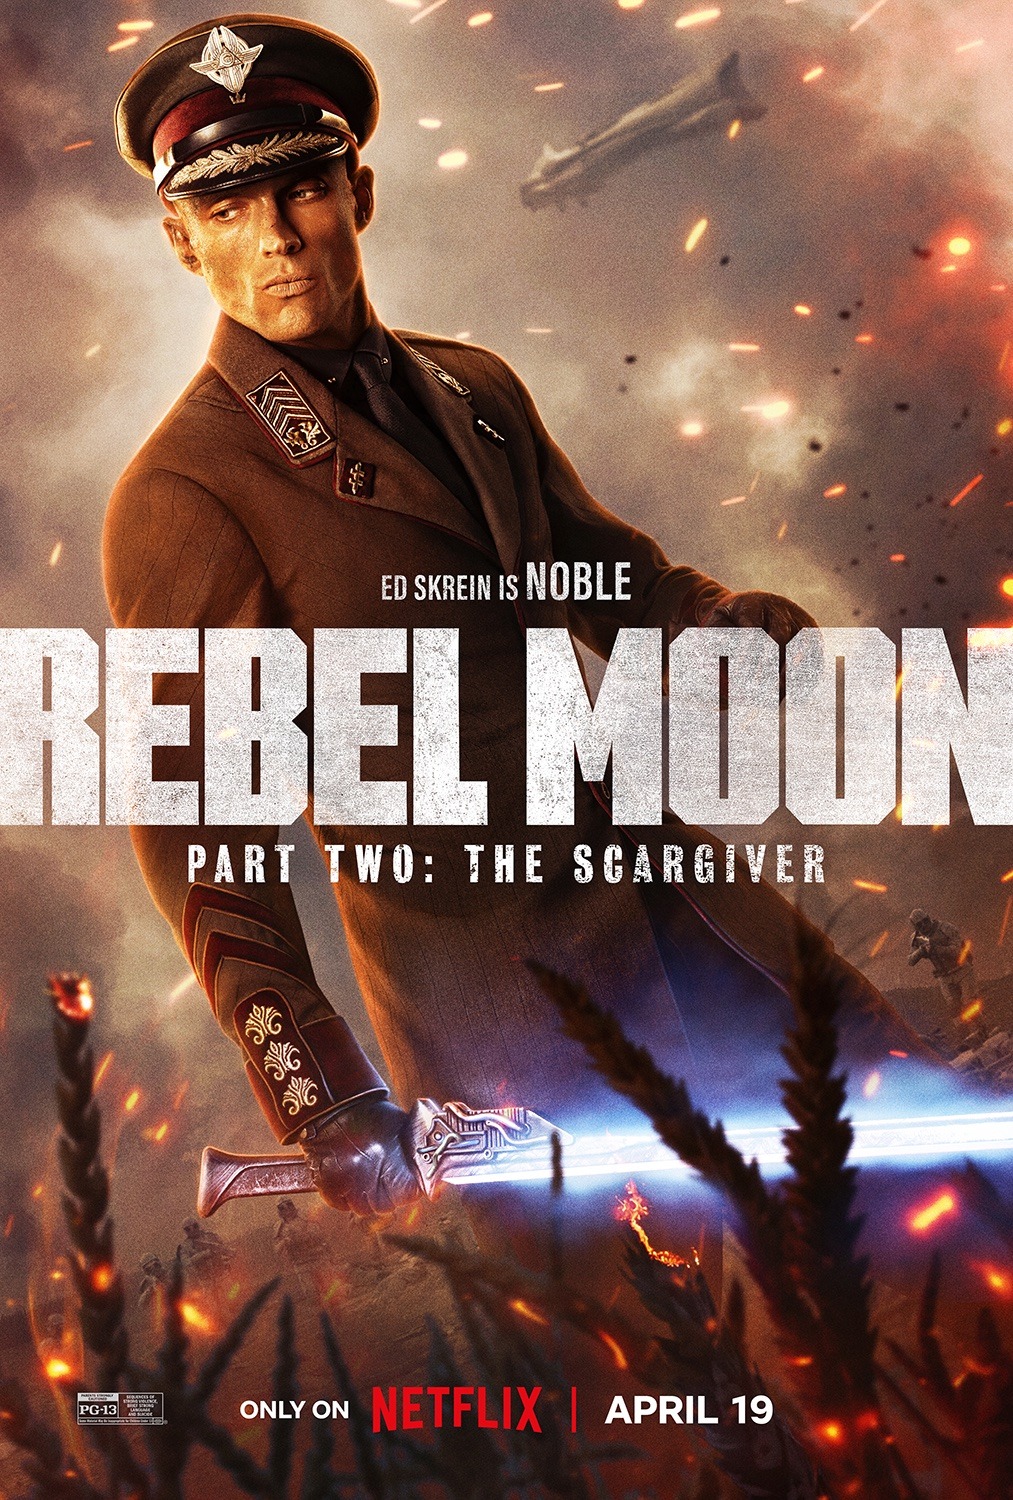 Extra Large Movie Poster Image for Rebel Moon - Part Two: The Scargiver (#10 of 11)